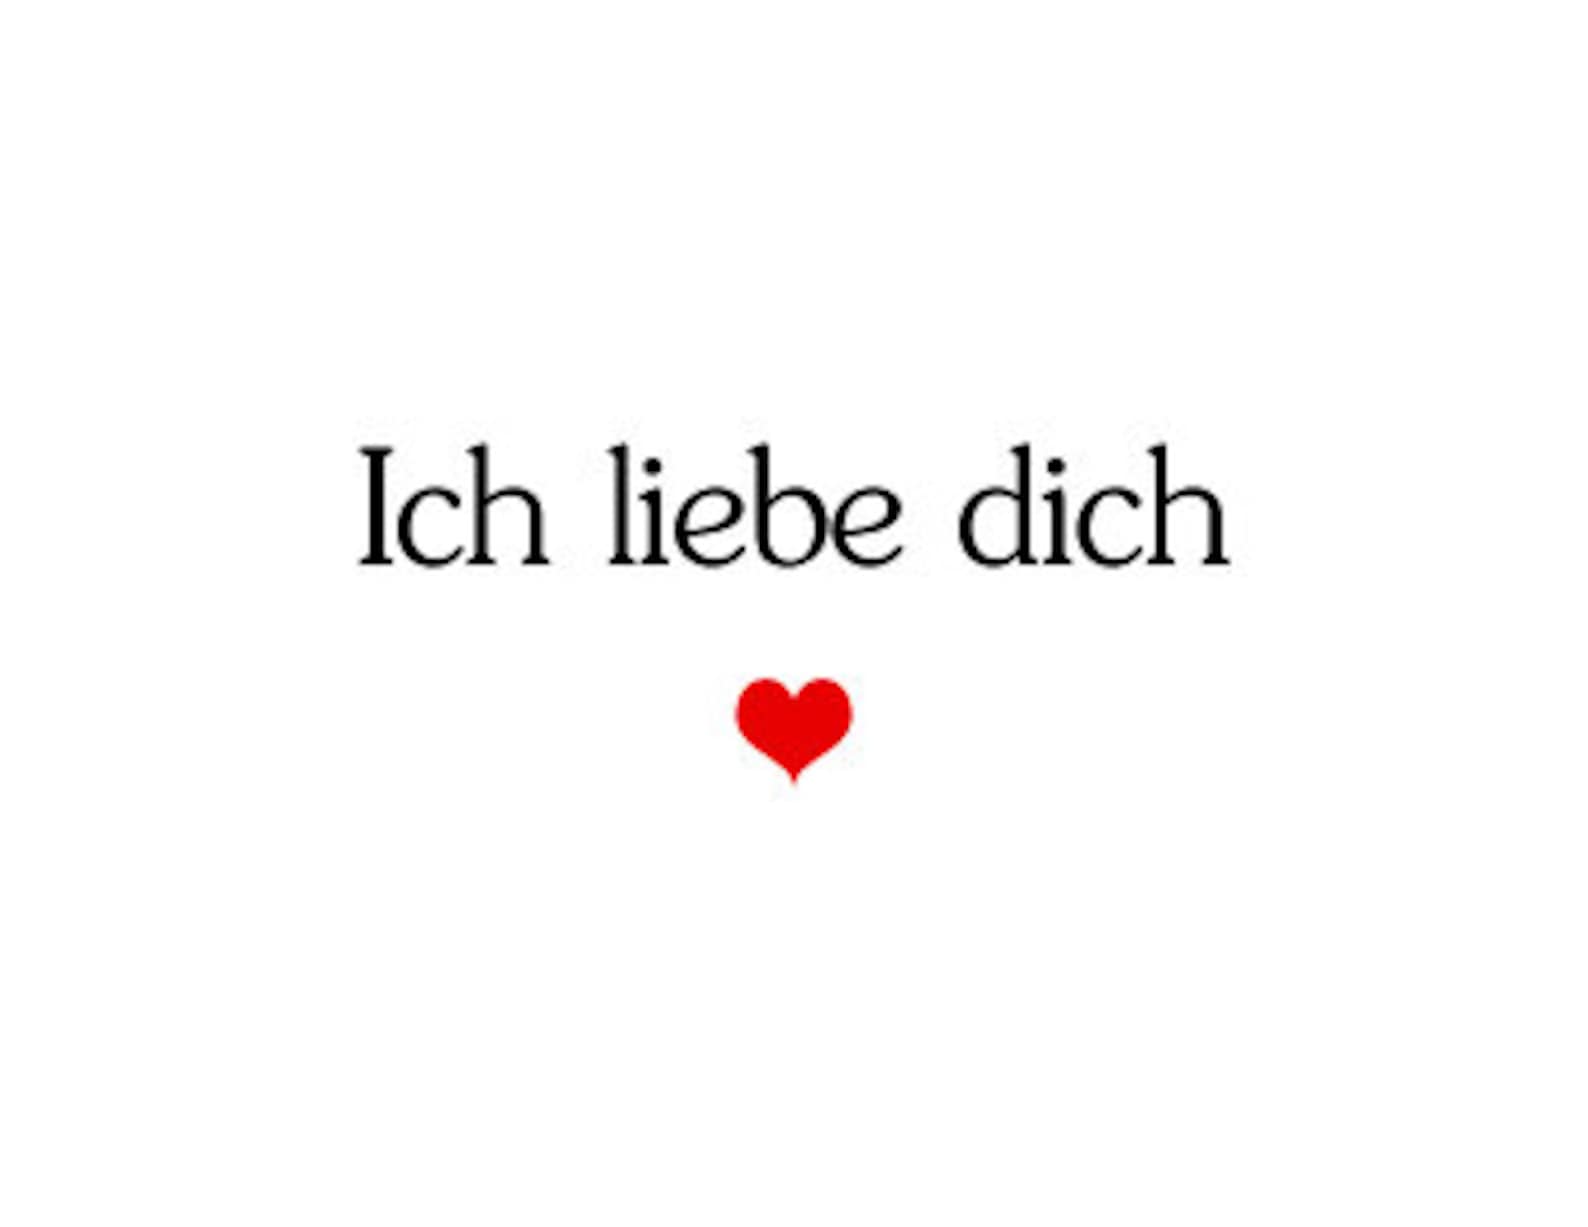 I love you in German Card for him or her Ich liebe dich image 0.